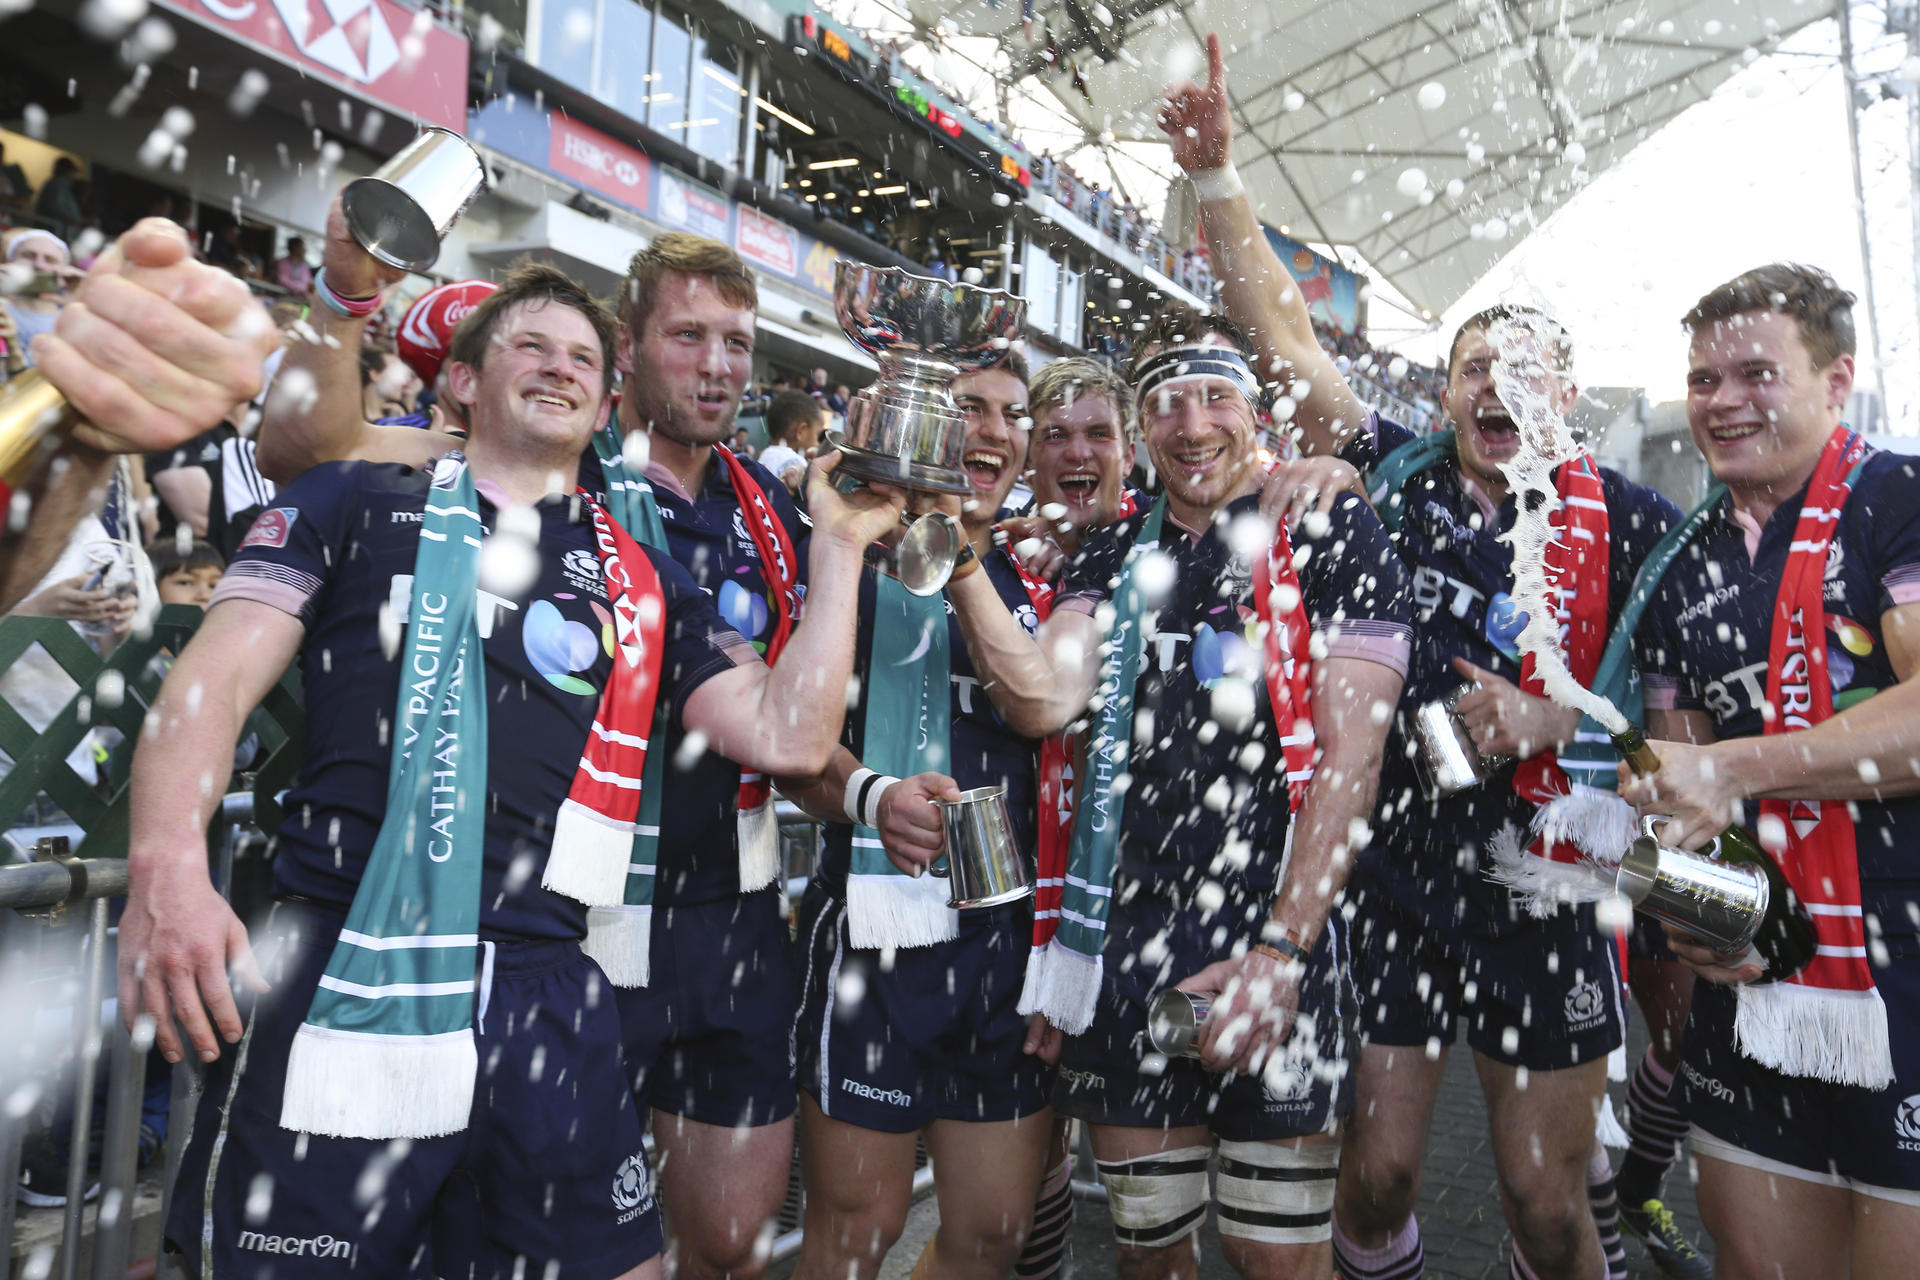 Proud Scotland players celebrate after defeating France 26-5 in the Bowl final to take some silverware back home. Photos: Sam Tsang/SCMP